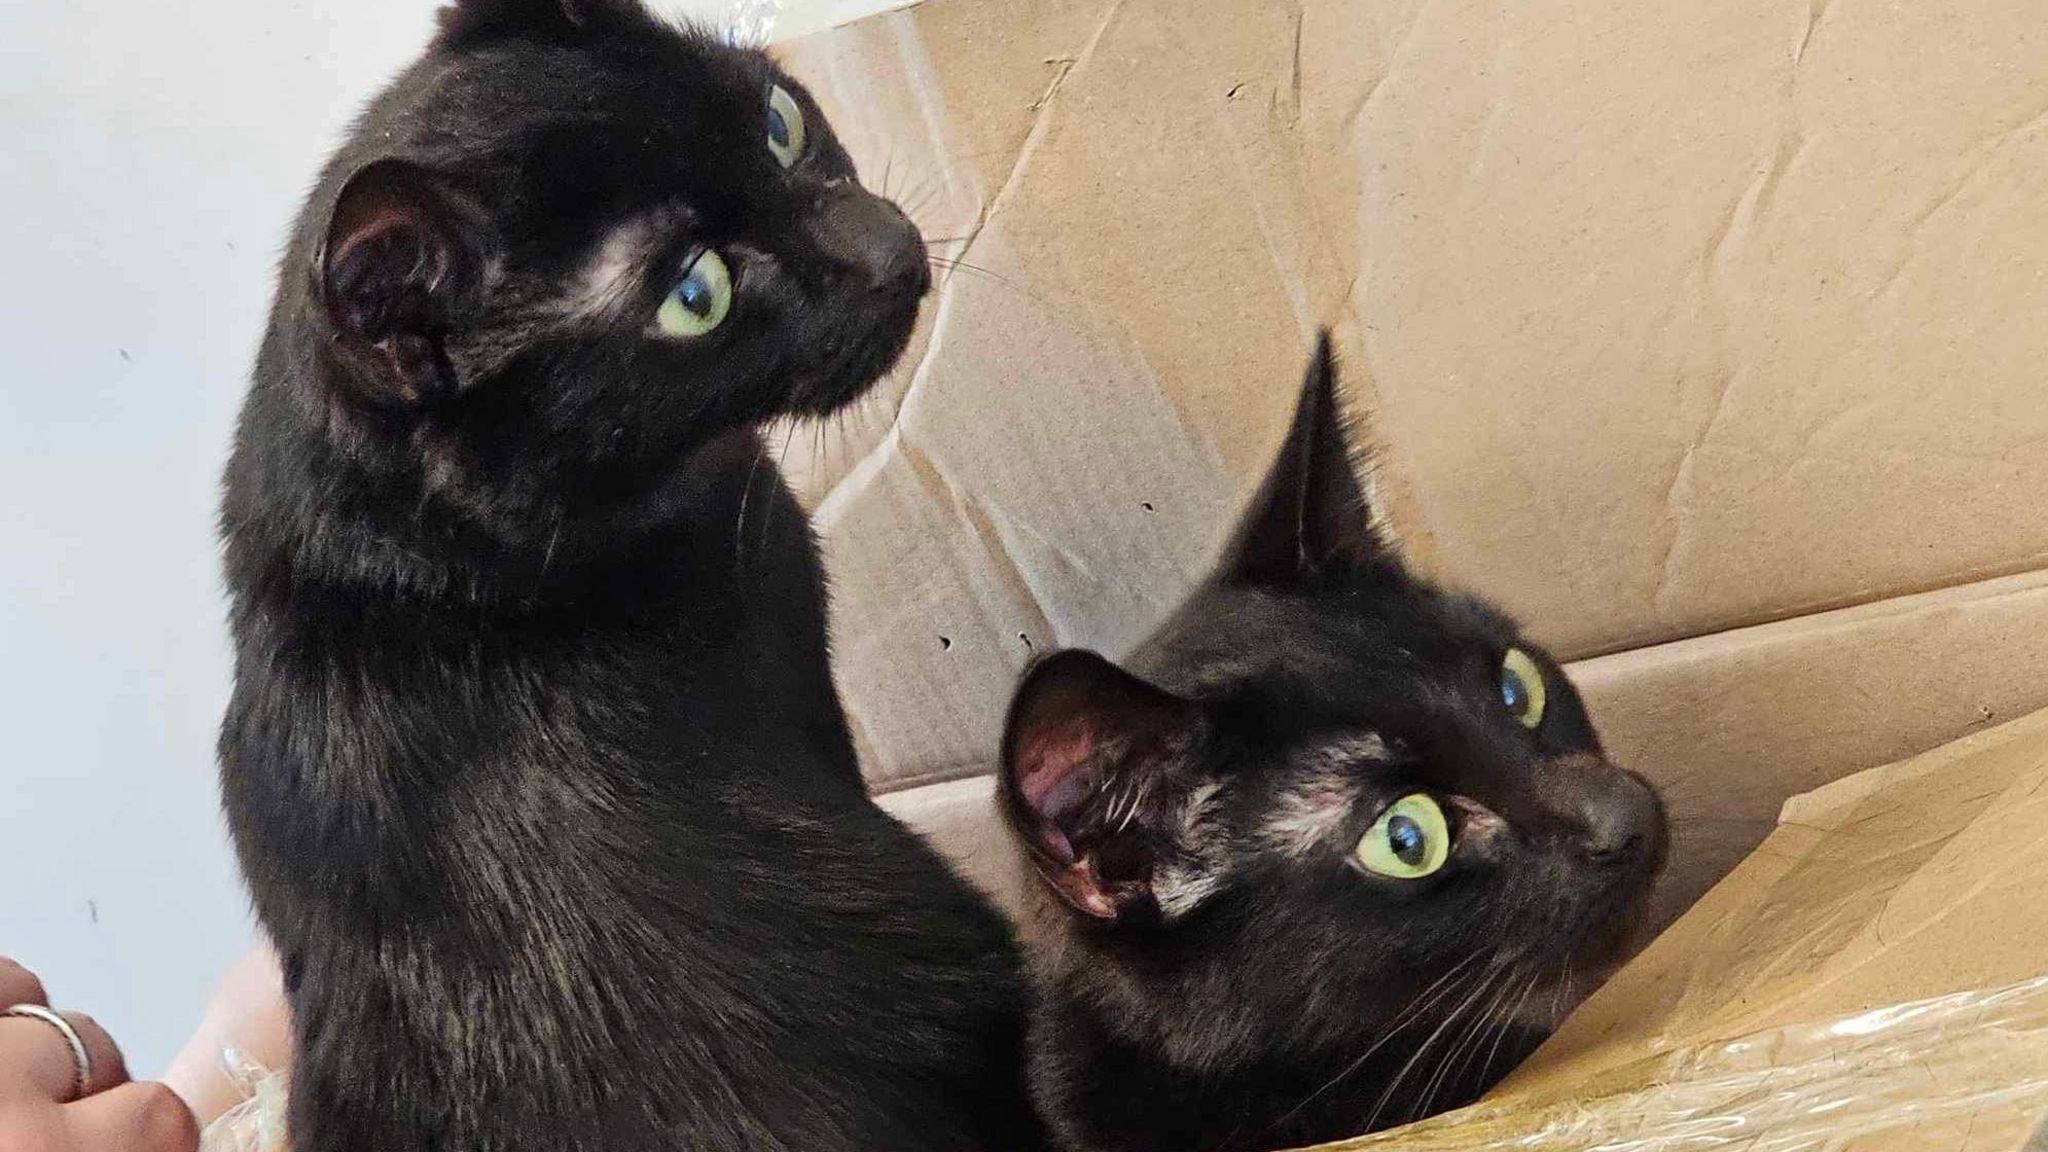 Sealed cardboard box of cats found dumped thumbnail